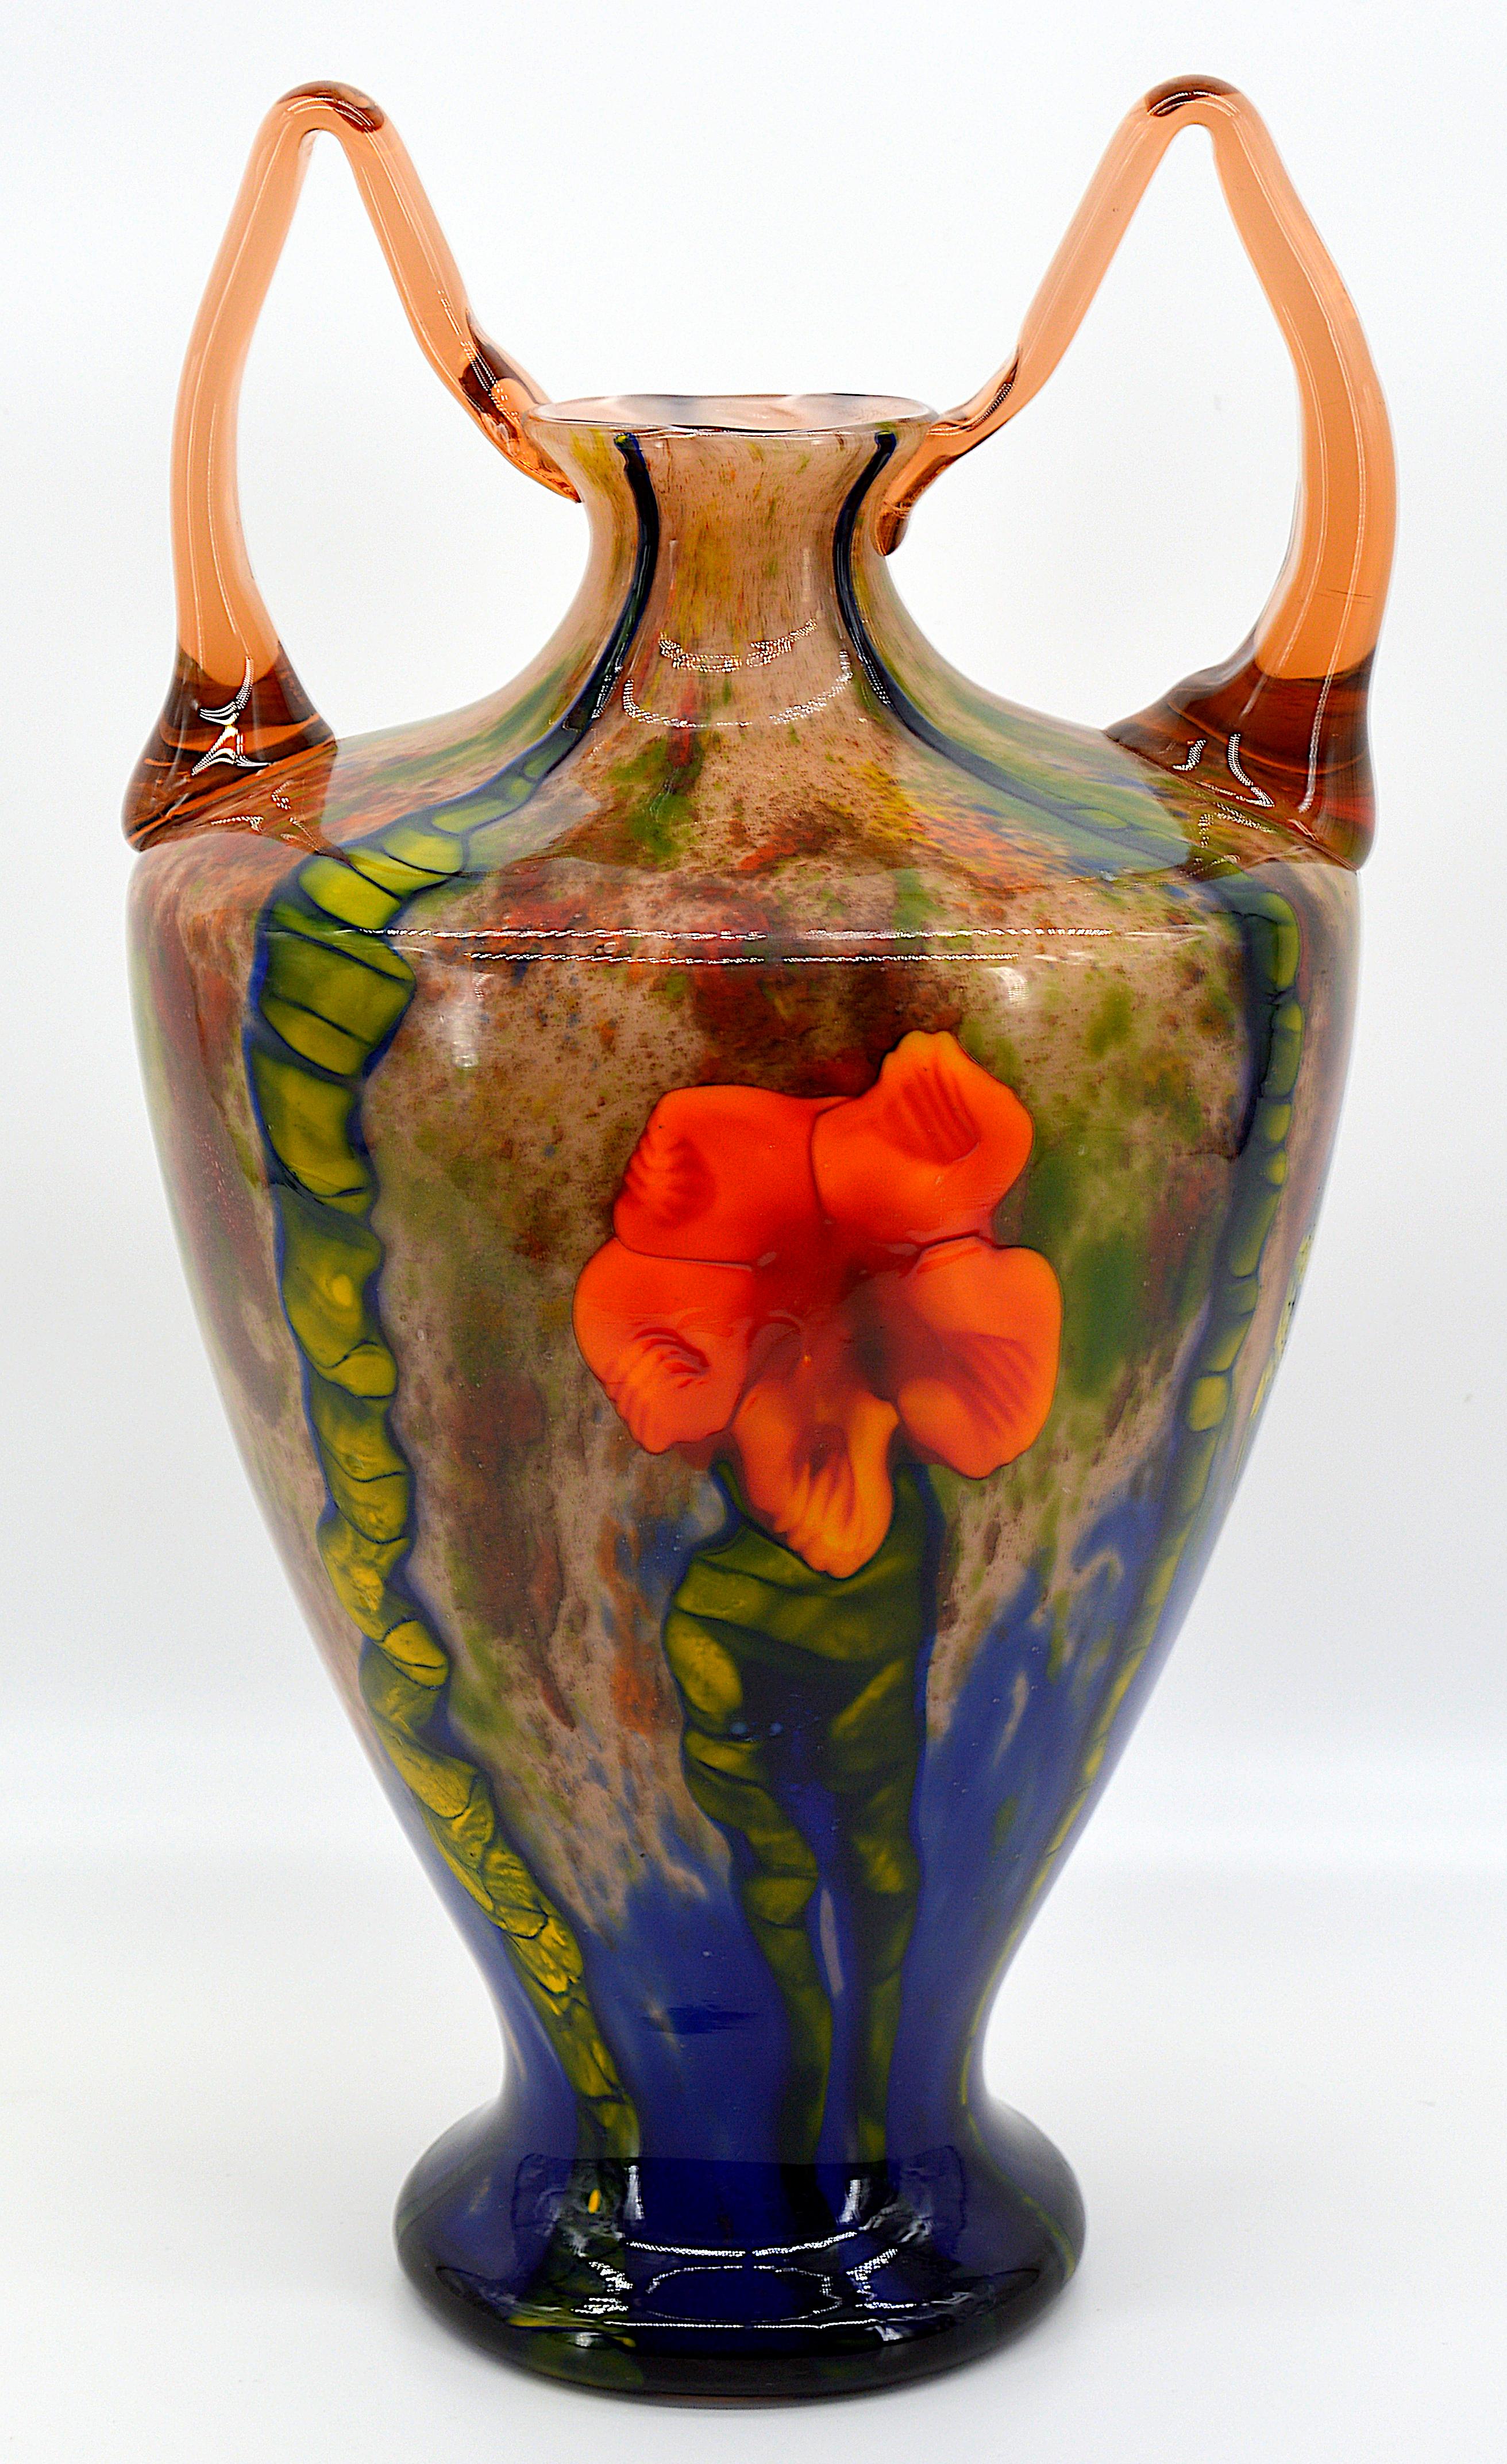 Tall grand marquetry vase by Kralik (Bohemia), Czechoslovakia, 1920s. Large blown double glass vase with marquetry of flowers and leaves. Glossy surface. One of the most beautiful we ever saw. Measures: Height 16